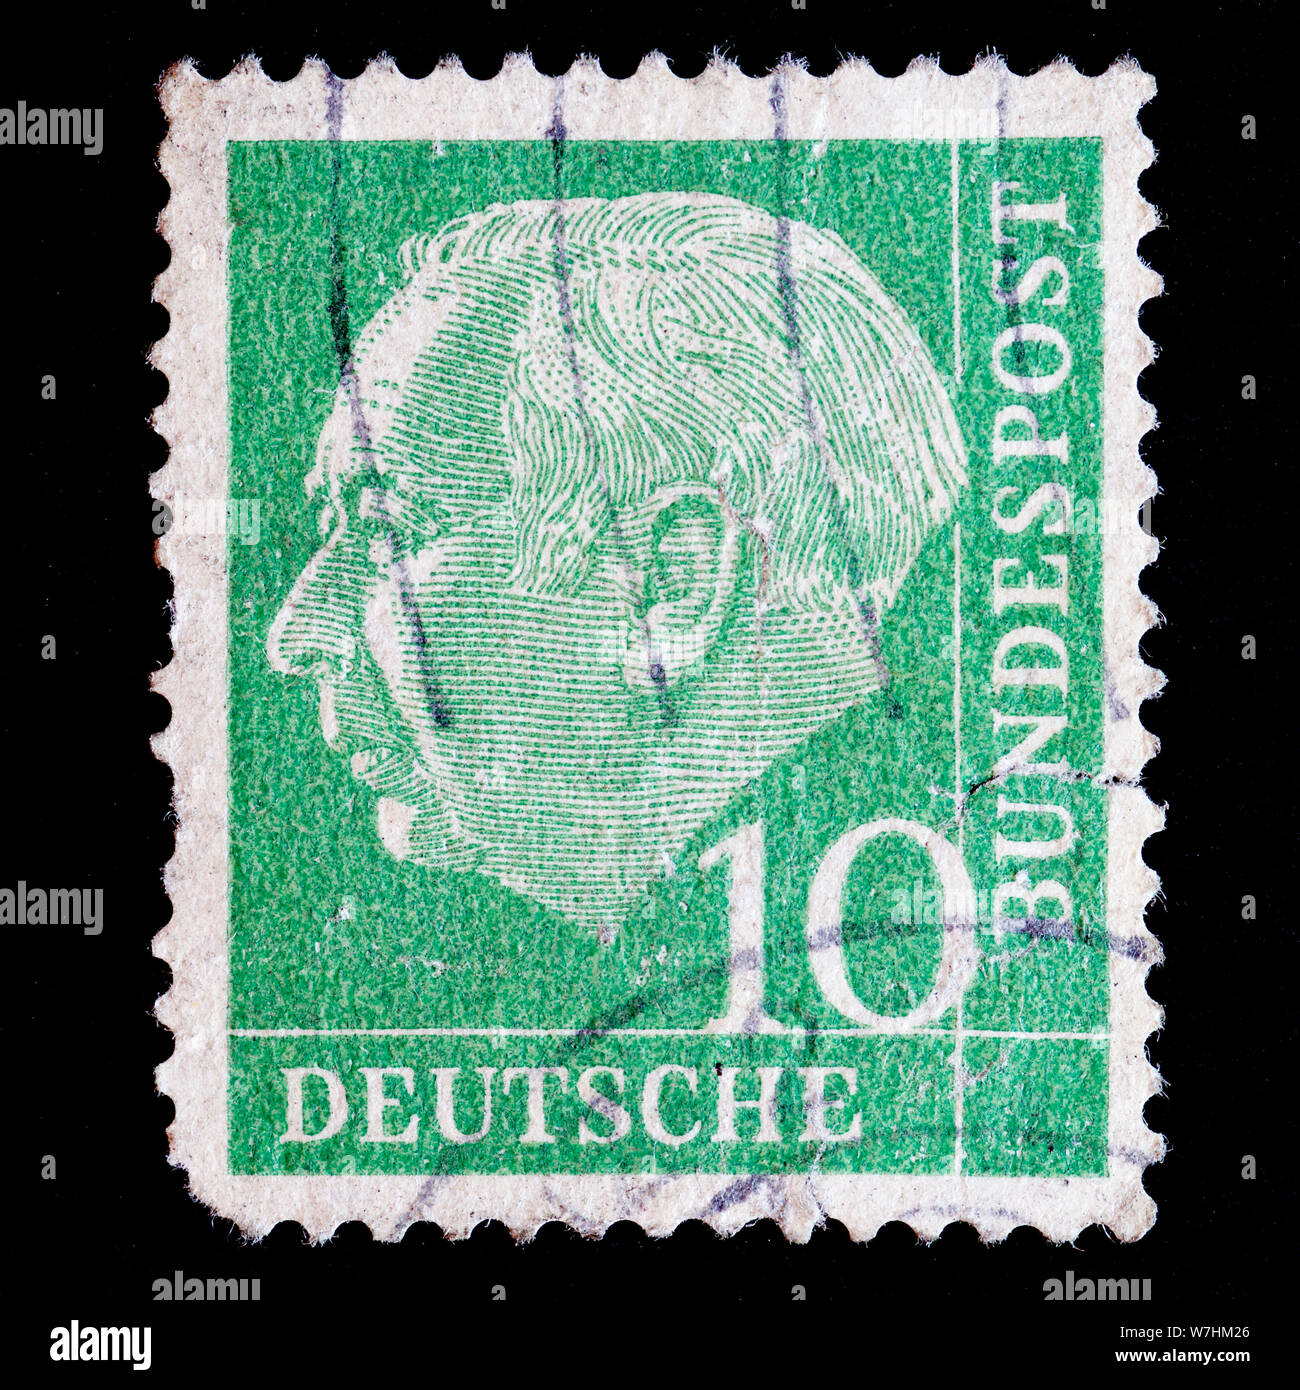 West Germany Postage Stamp - Prof. Dr. Theodor Heuss (1884-1963), 1st German President Stock Photo